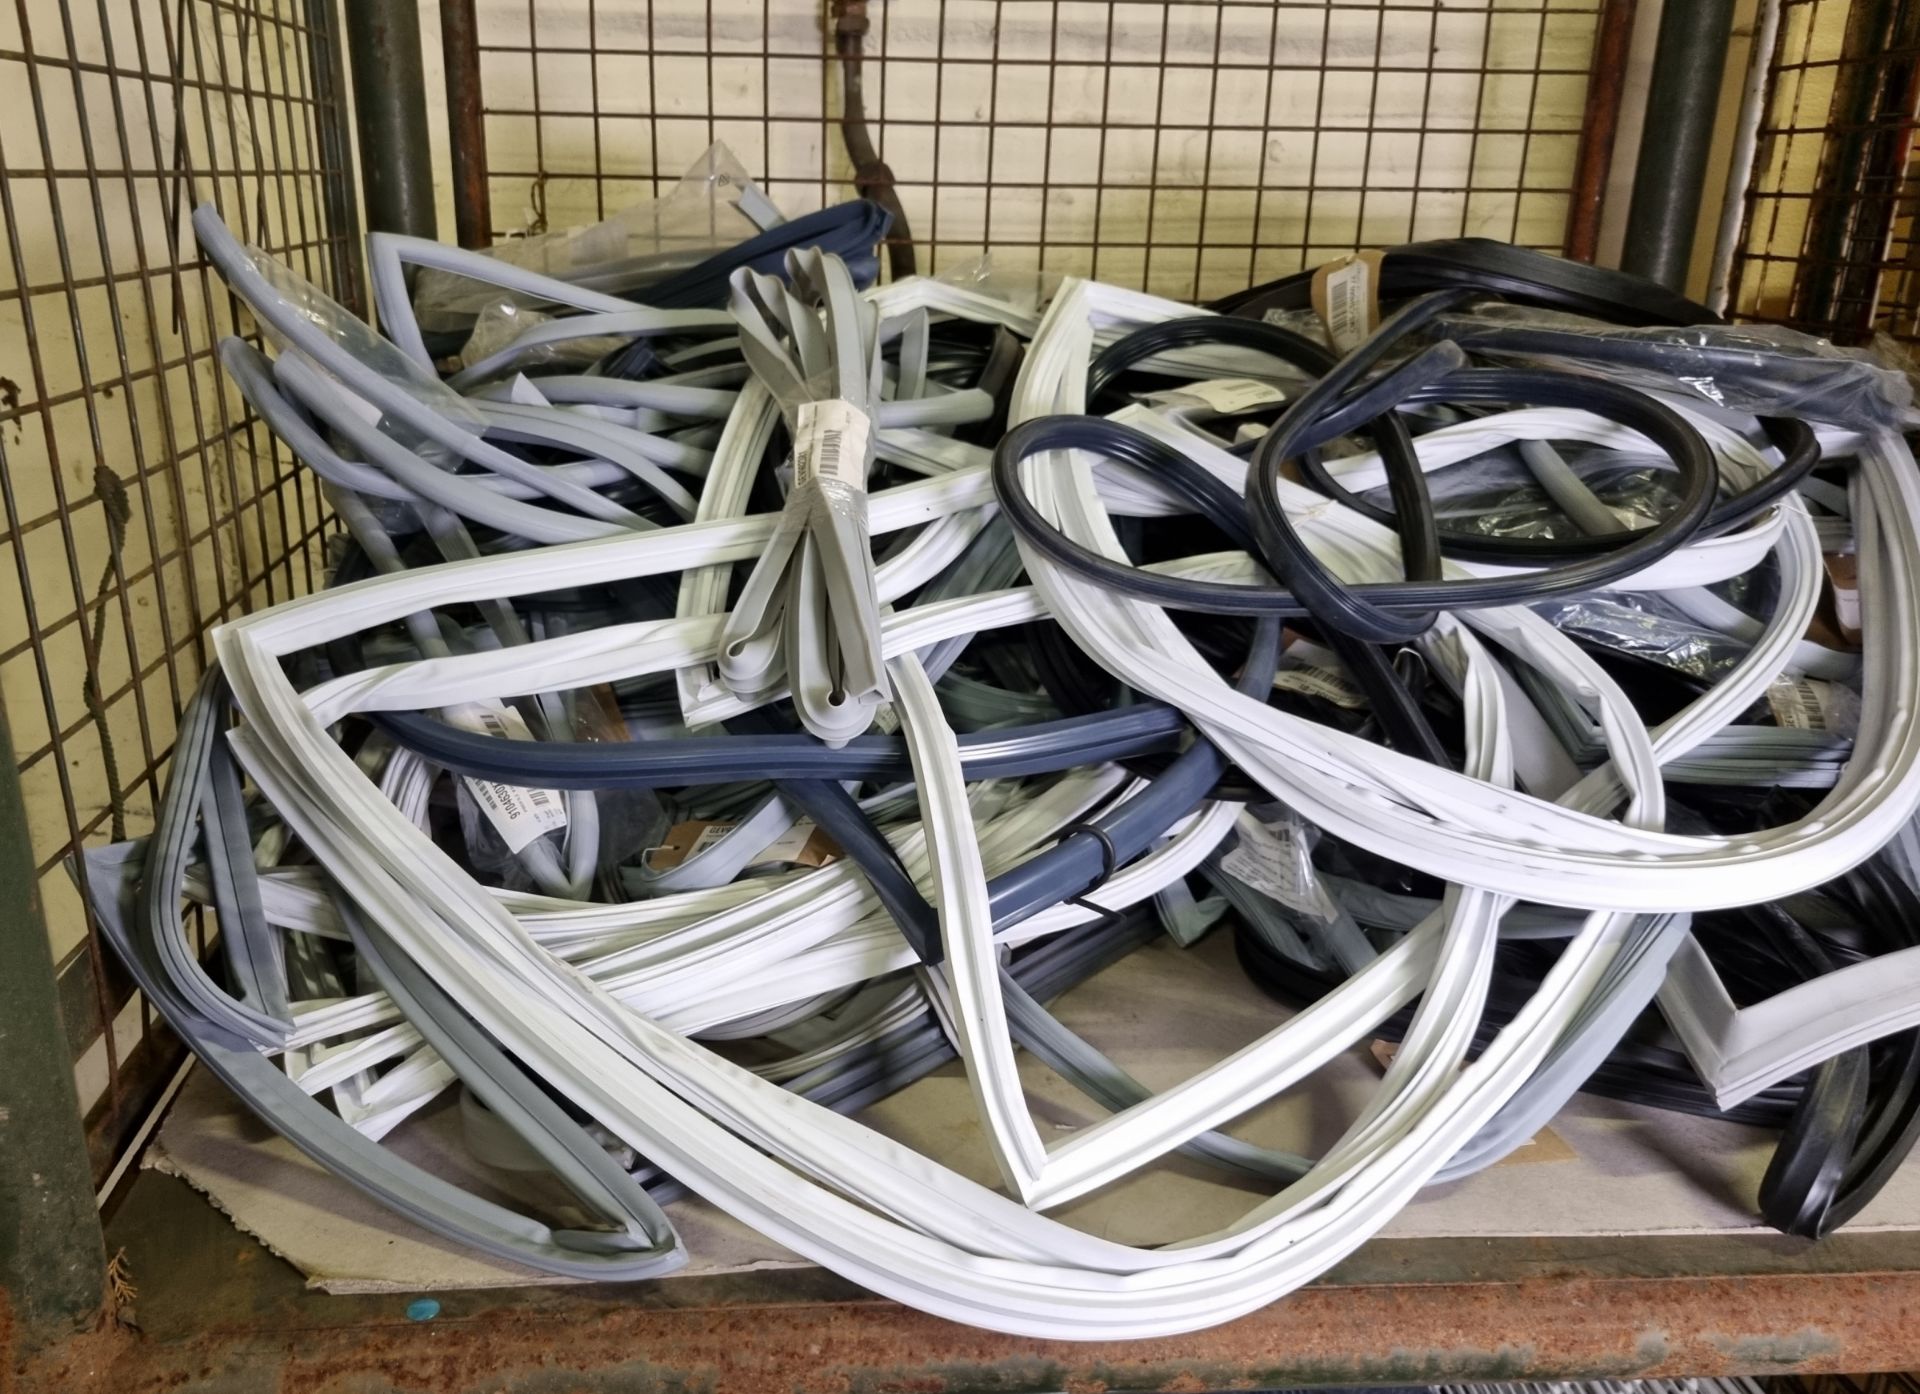 Rubber door seal gaskets - mixed sizes - approximately 90 pieces - Bild 3 aus 3